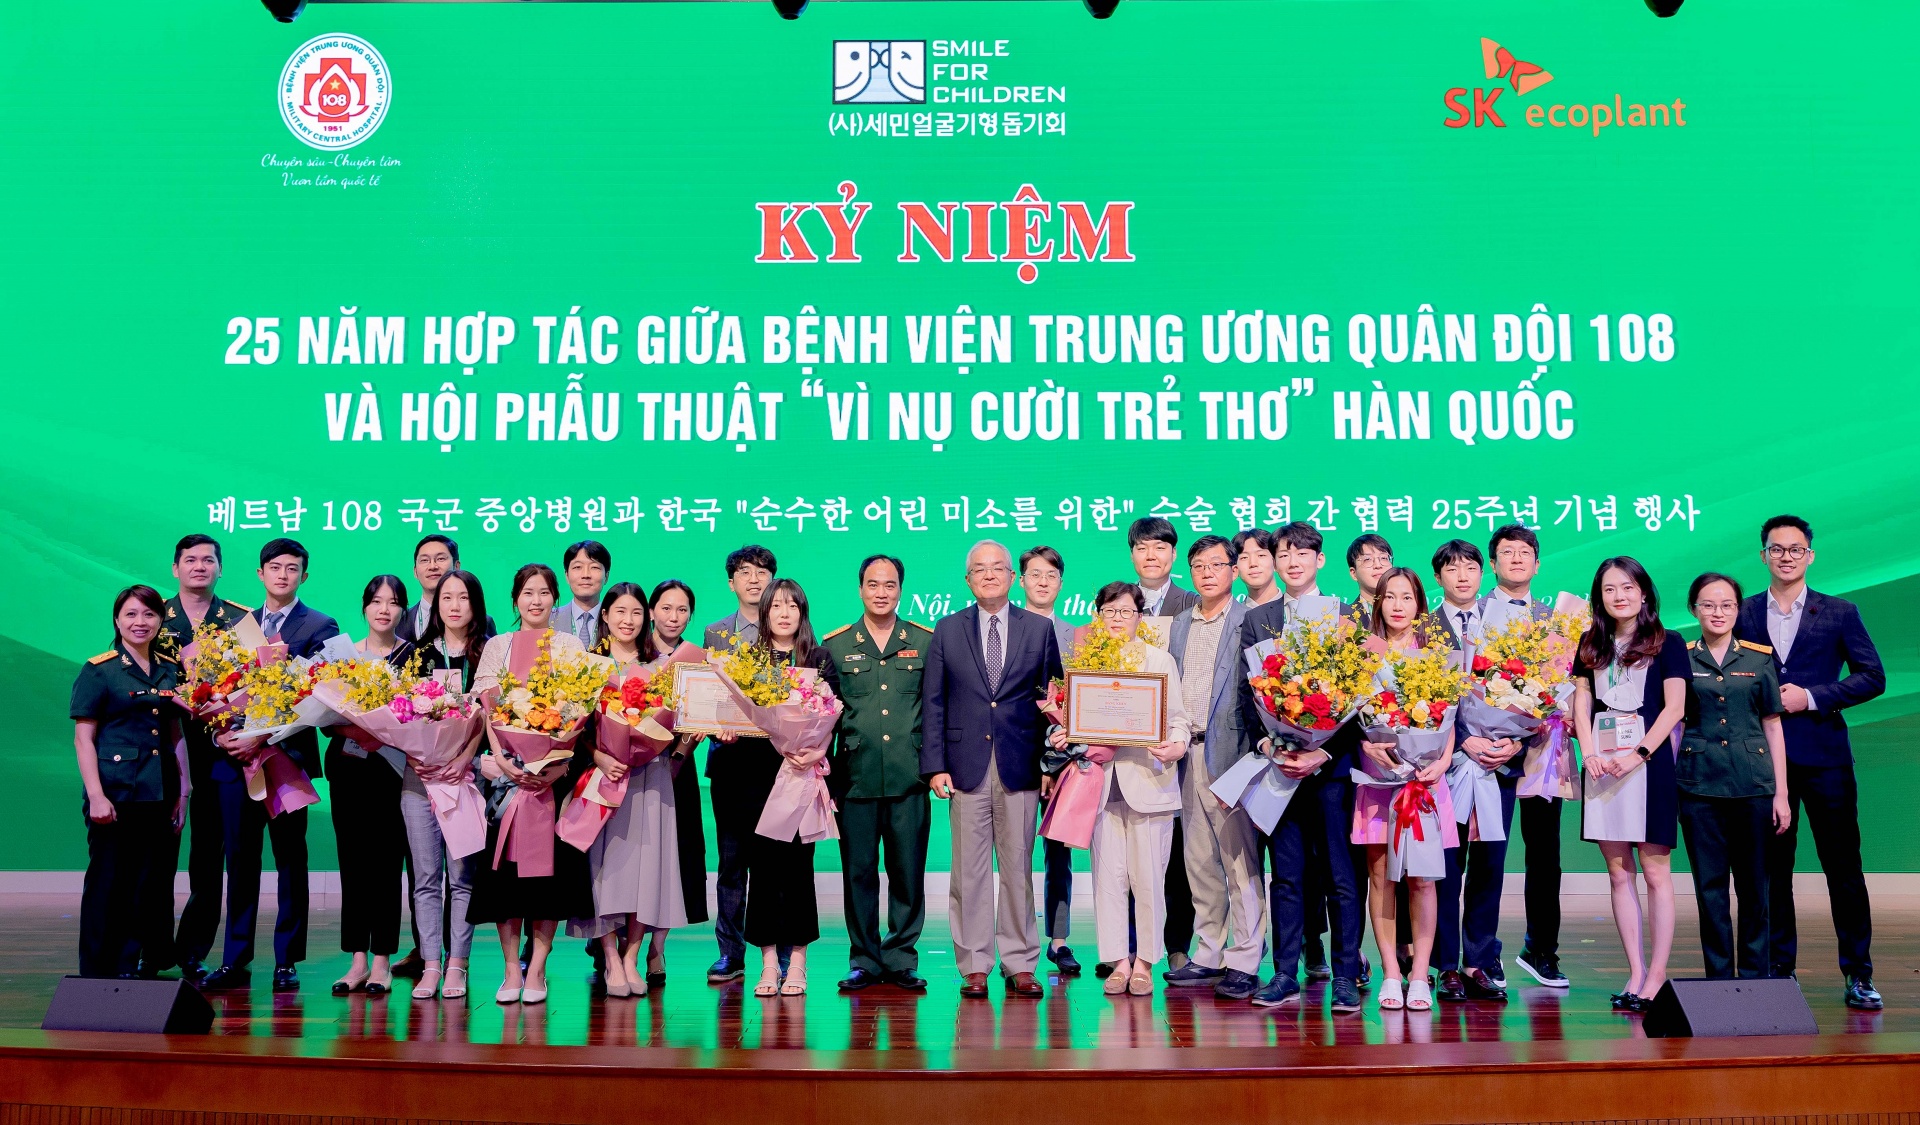 SK Group gifts 4,000 Vietnamese children smile surgery over 25 years